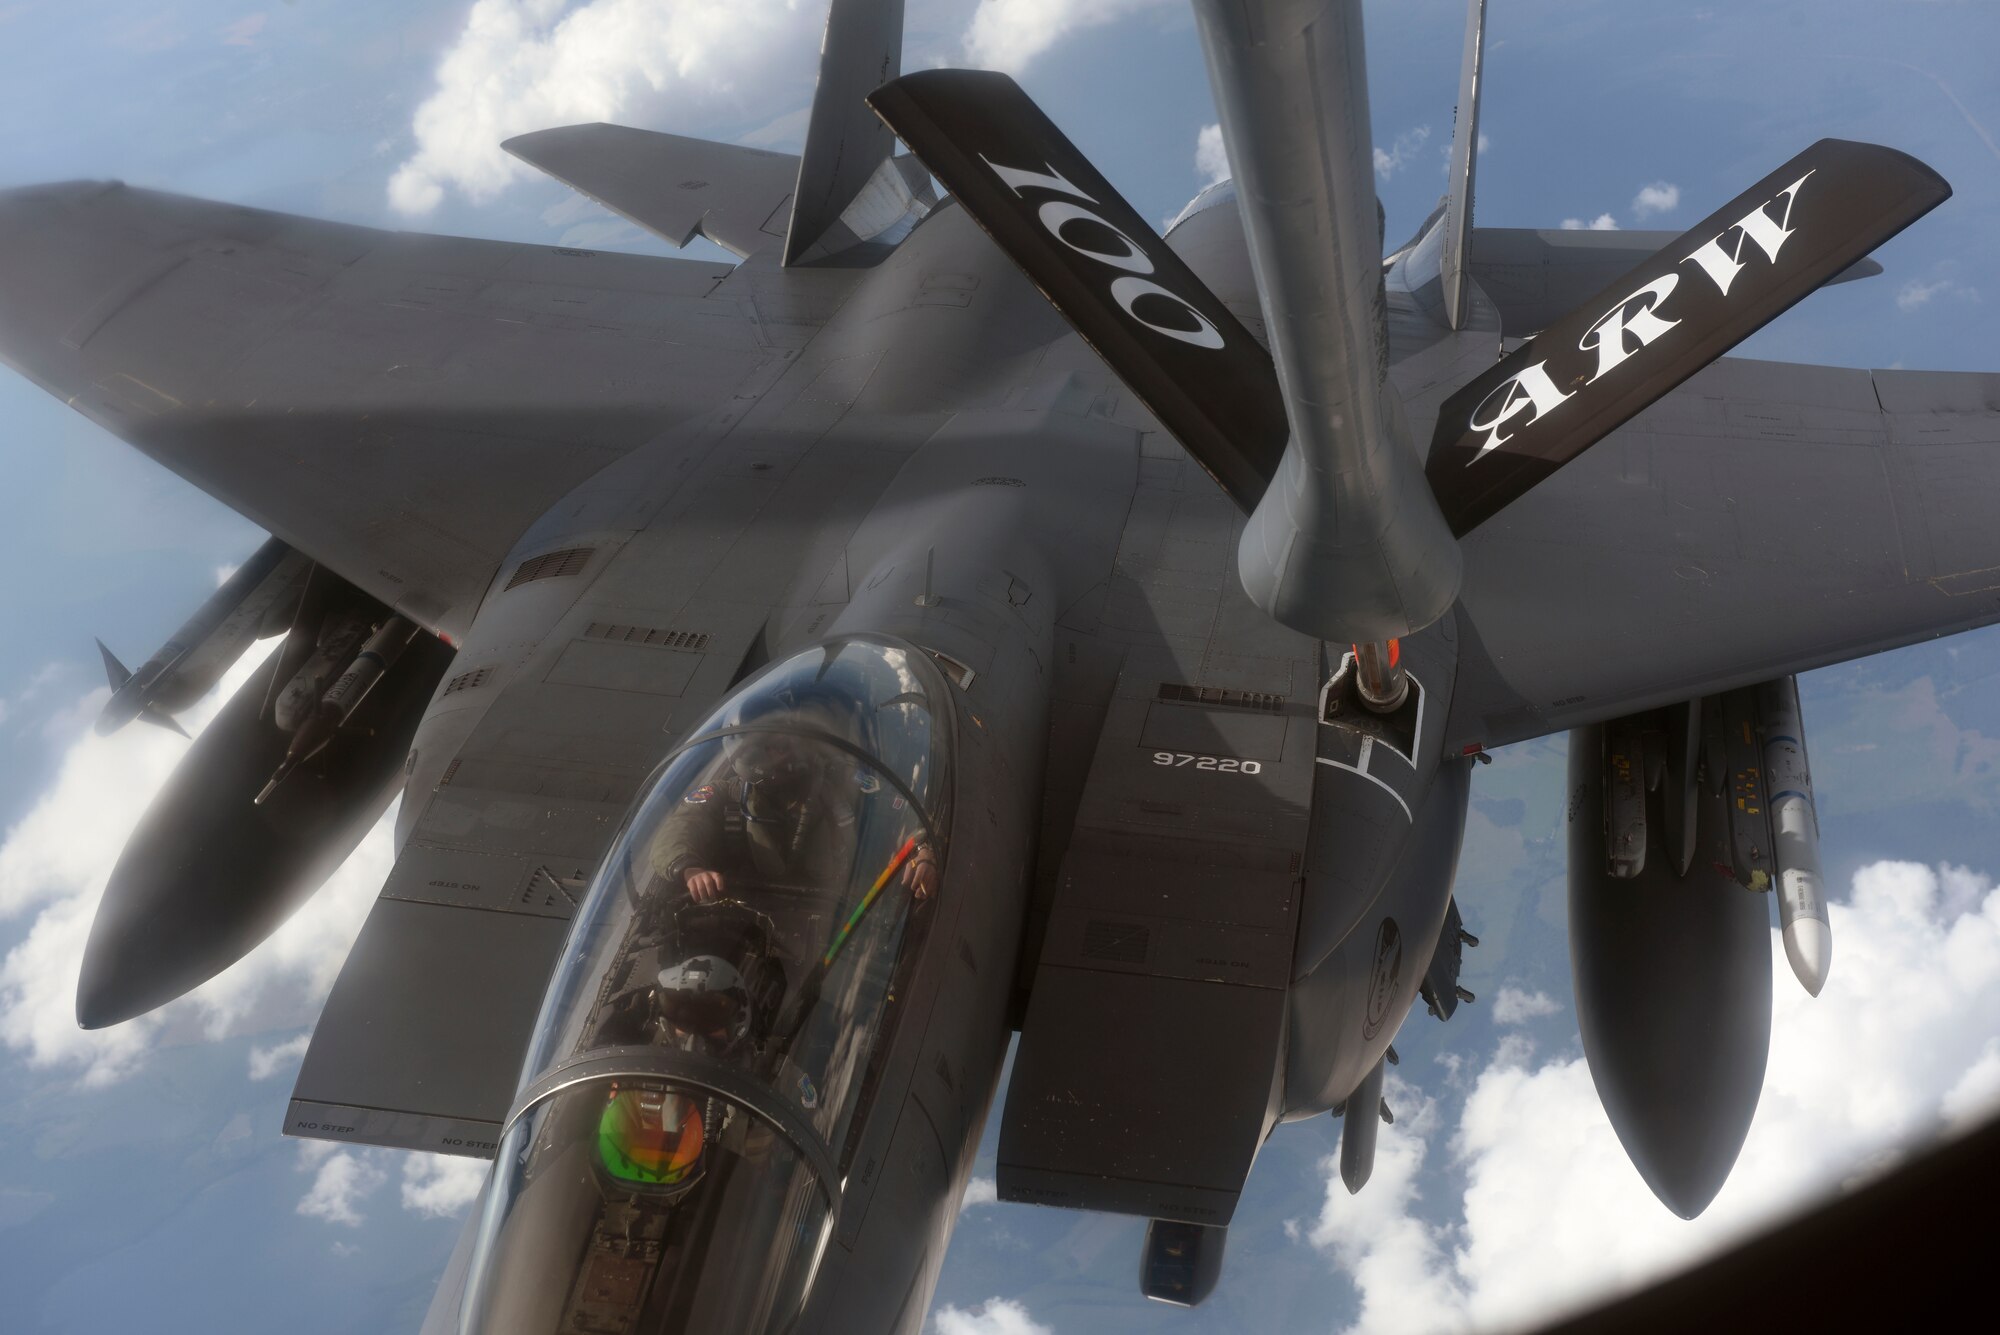 A U.S. Air Force F-15E Strike Eagle assigned to the 492nd Fighter Squadron at RAF Lakenheath, England, receives fuel over Germany from a KC-135 Stratotanker assigned to the 351st Air Refueling Squadron at RAF Mildenhall, England, June 19, 2019. The refueling was part of the annual Baltic Operations exercise which began in 1972 and is now in its 47th year. (U.S. Air Force photo by Airman 1st Class Joseph Barron)